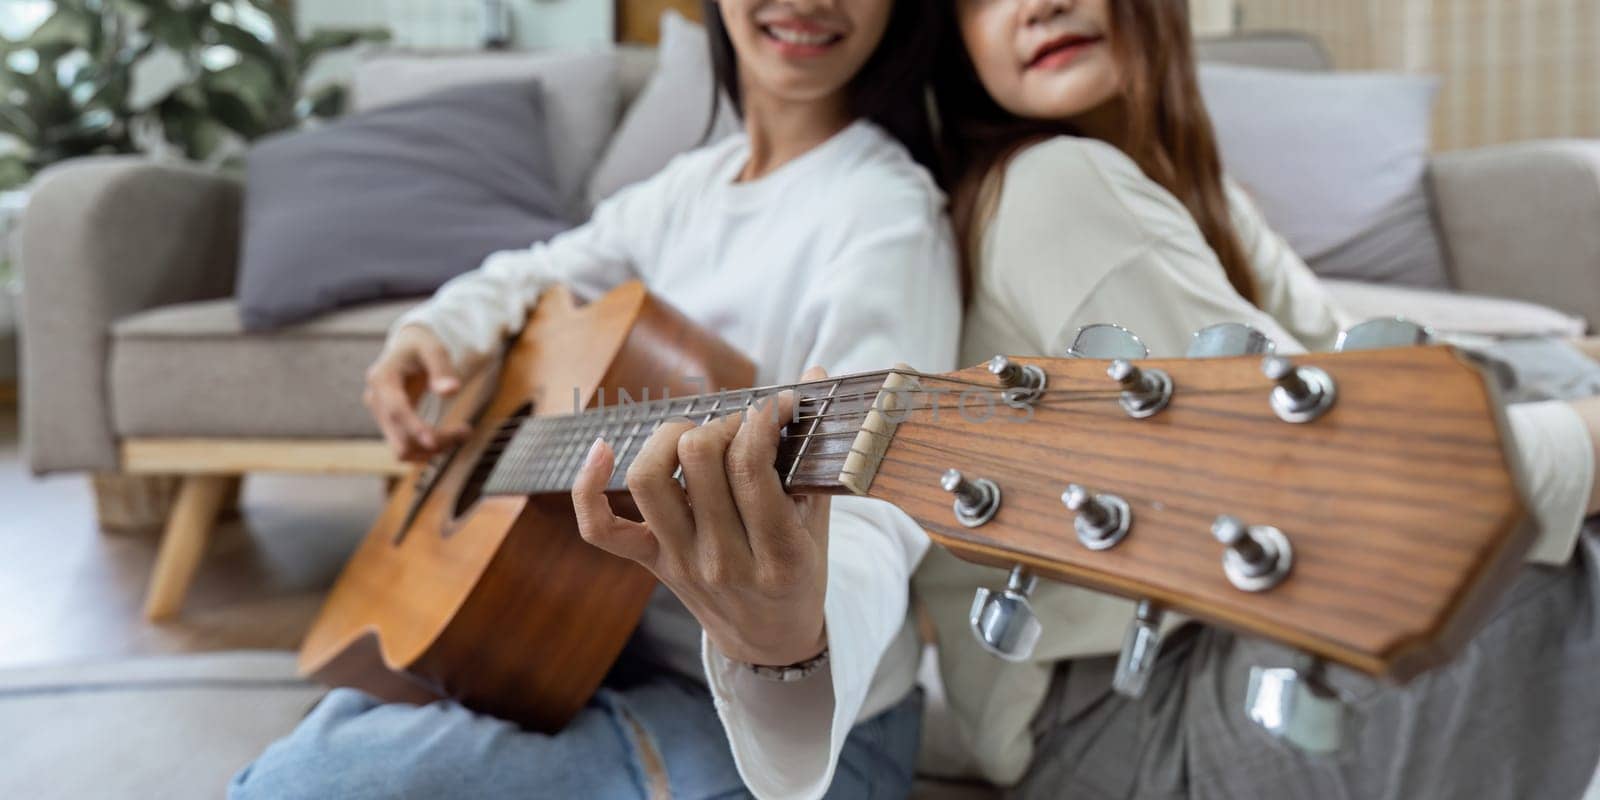 Lesbian couple lean against each other and sit and play guitar relaxed and happy together at home. by itchaznong